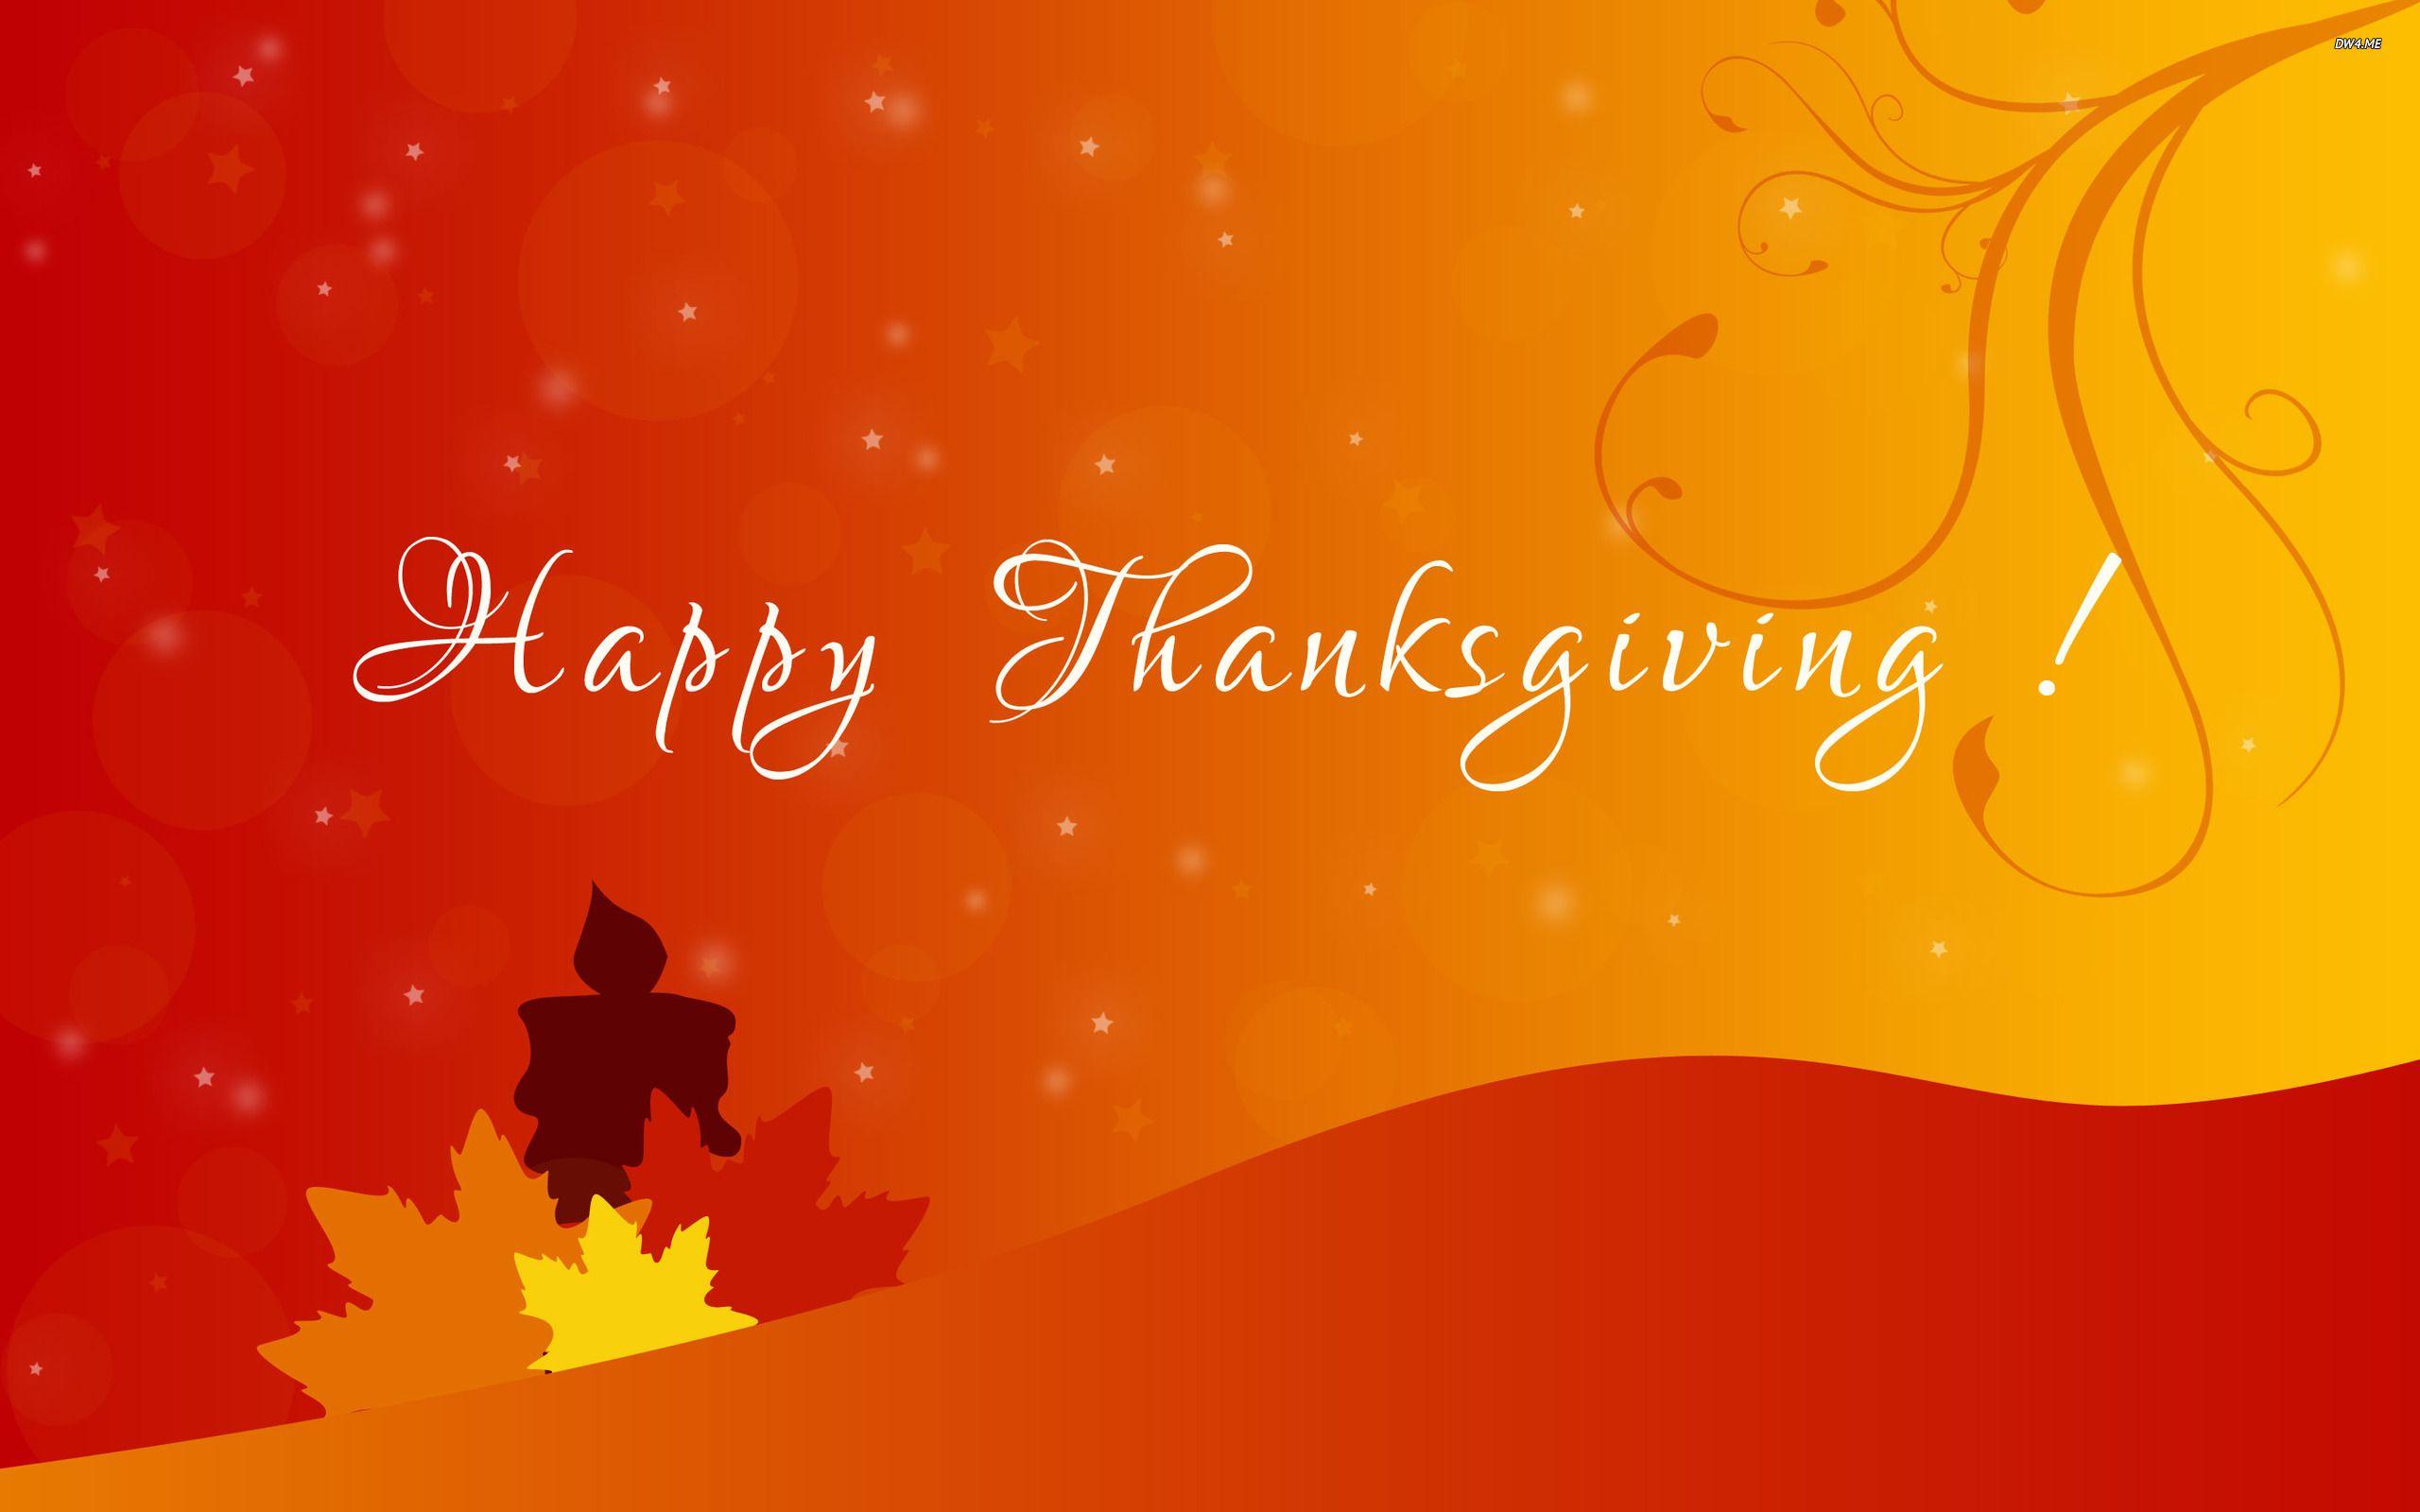 Happy Thanksgiving Background Image Picture & Wallpaper Collection